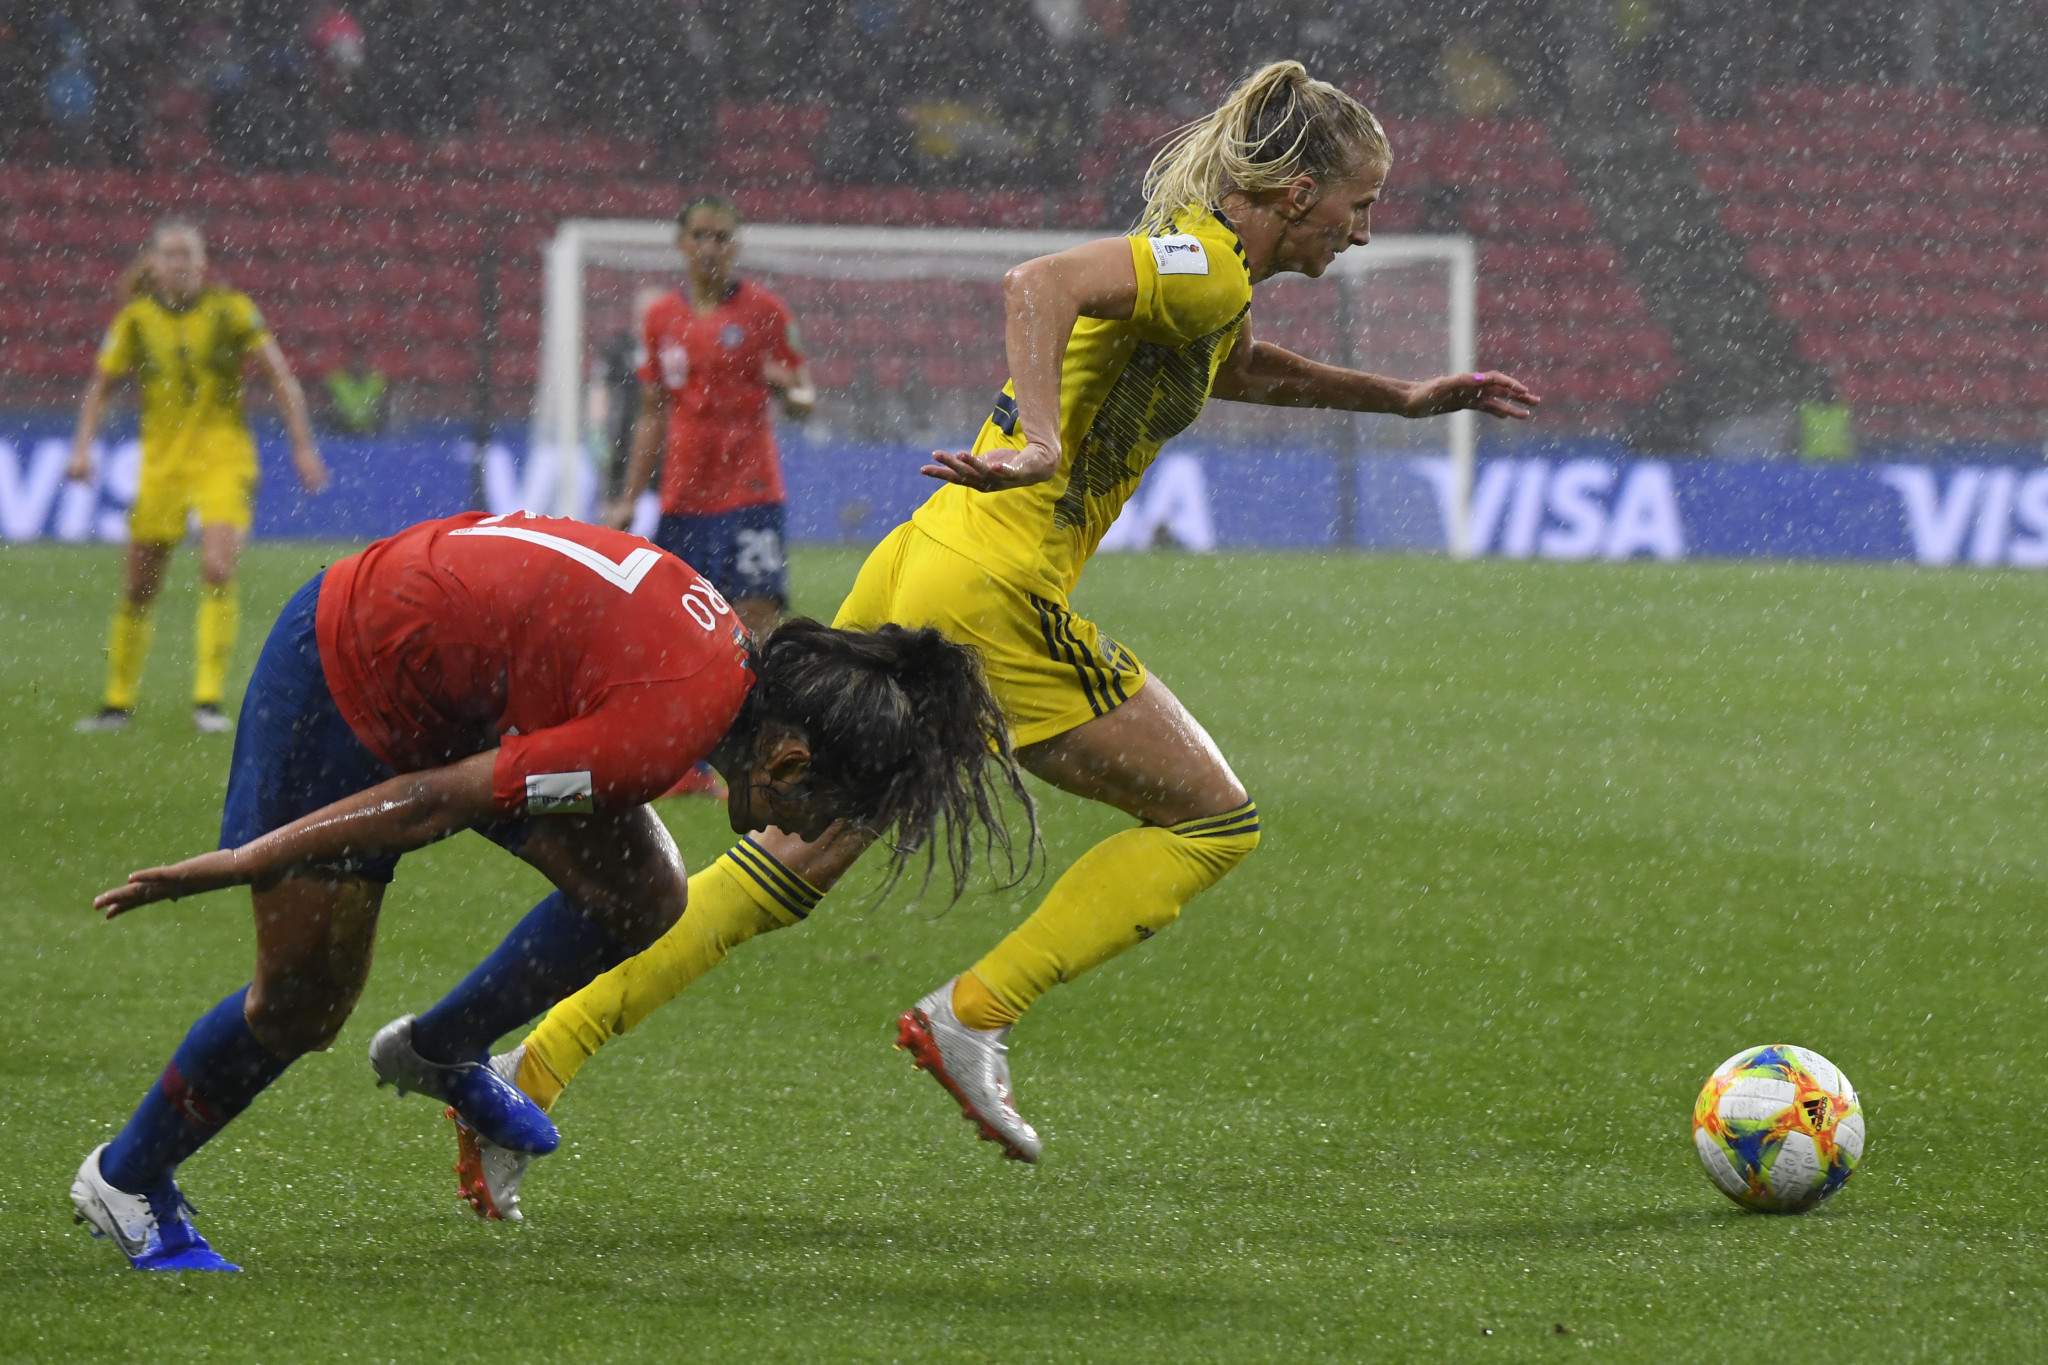 The referee halted the game in the 72nd minute due to the weather conditions ©Getty Images